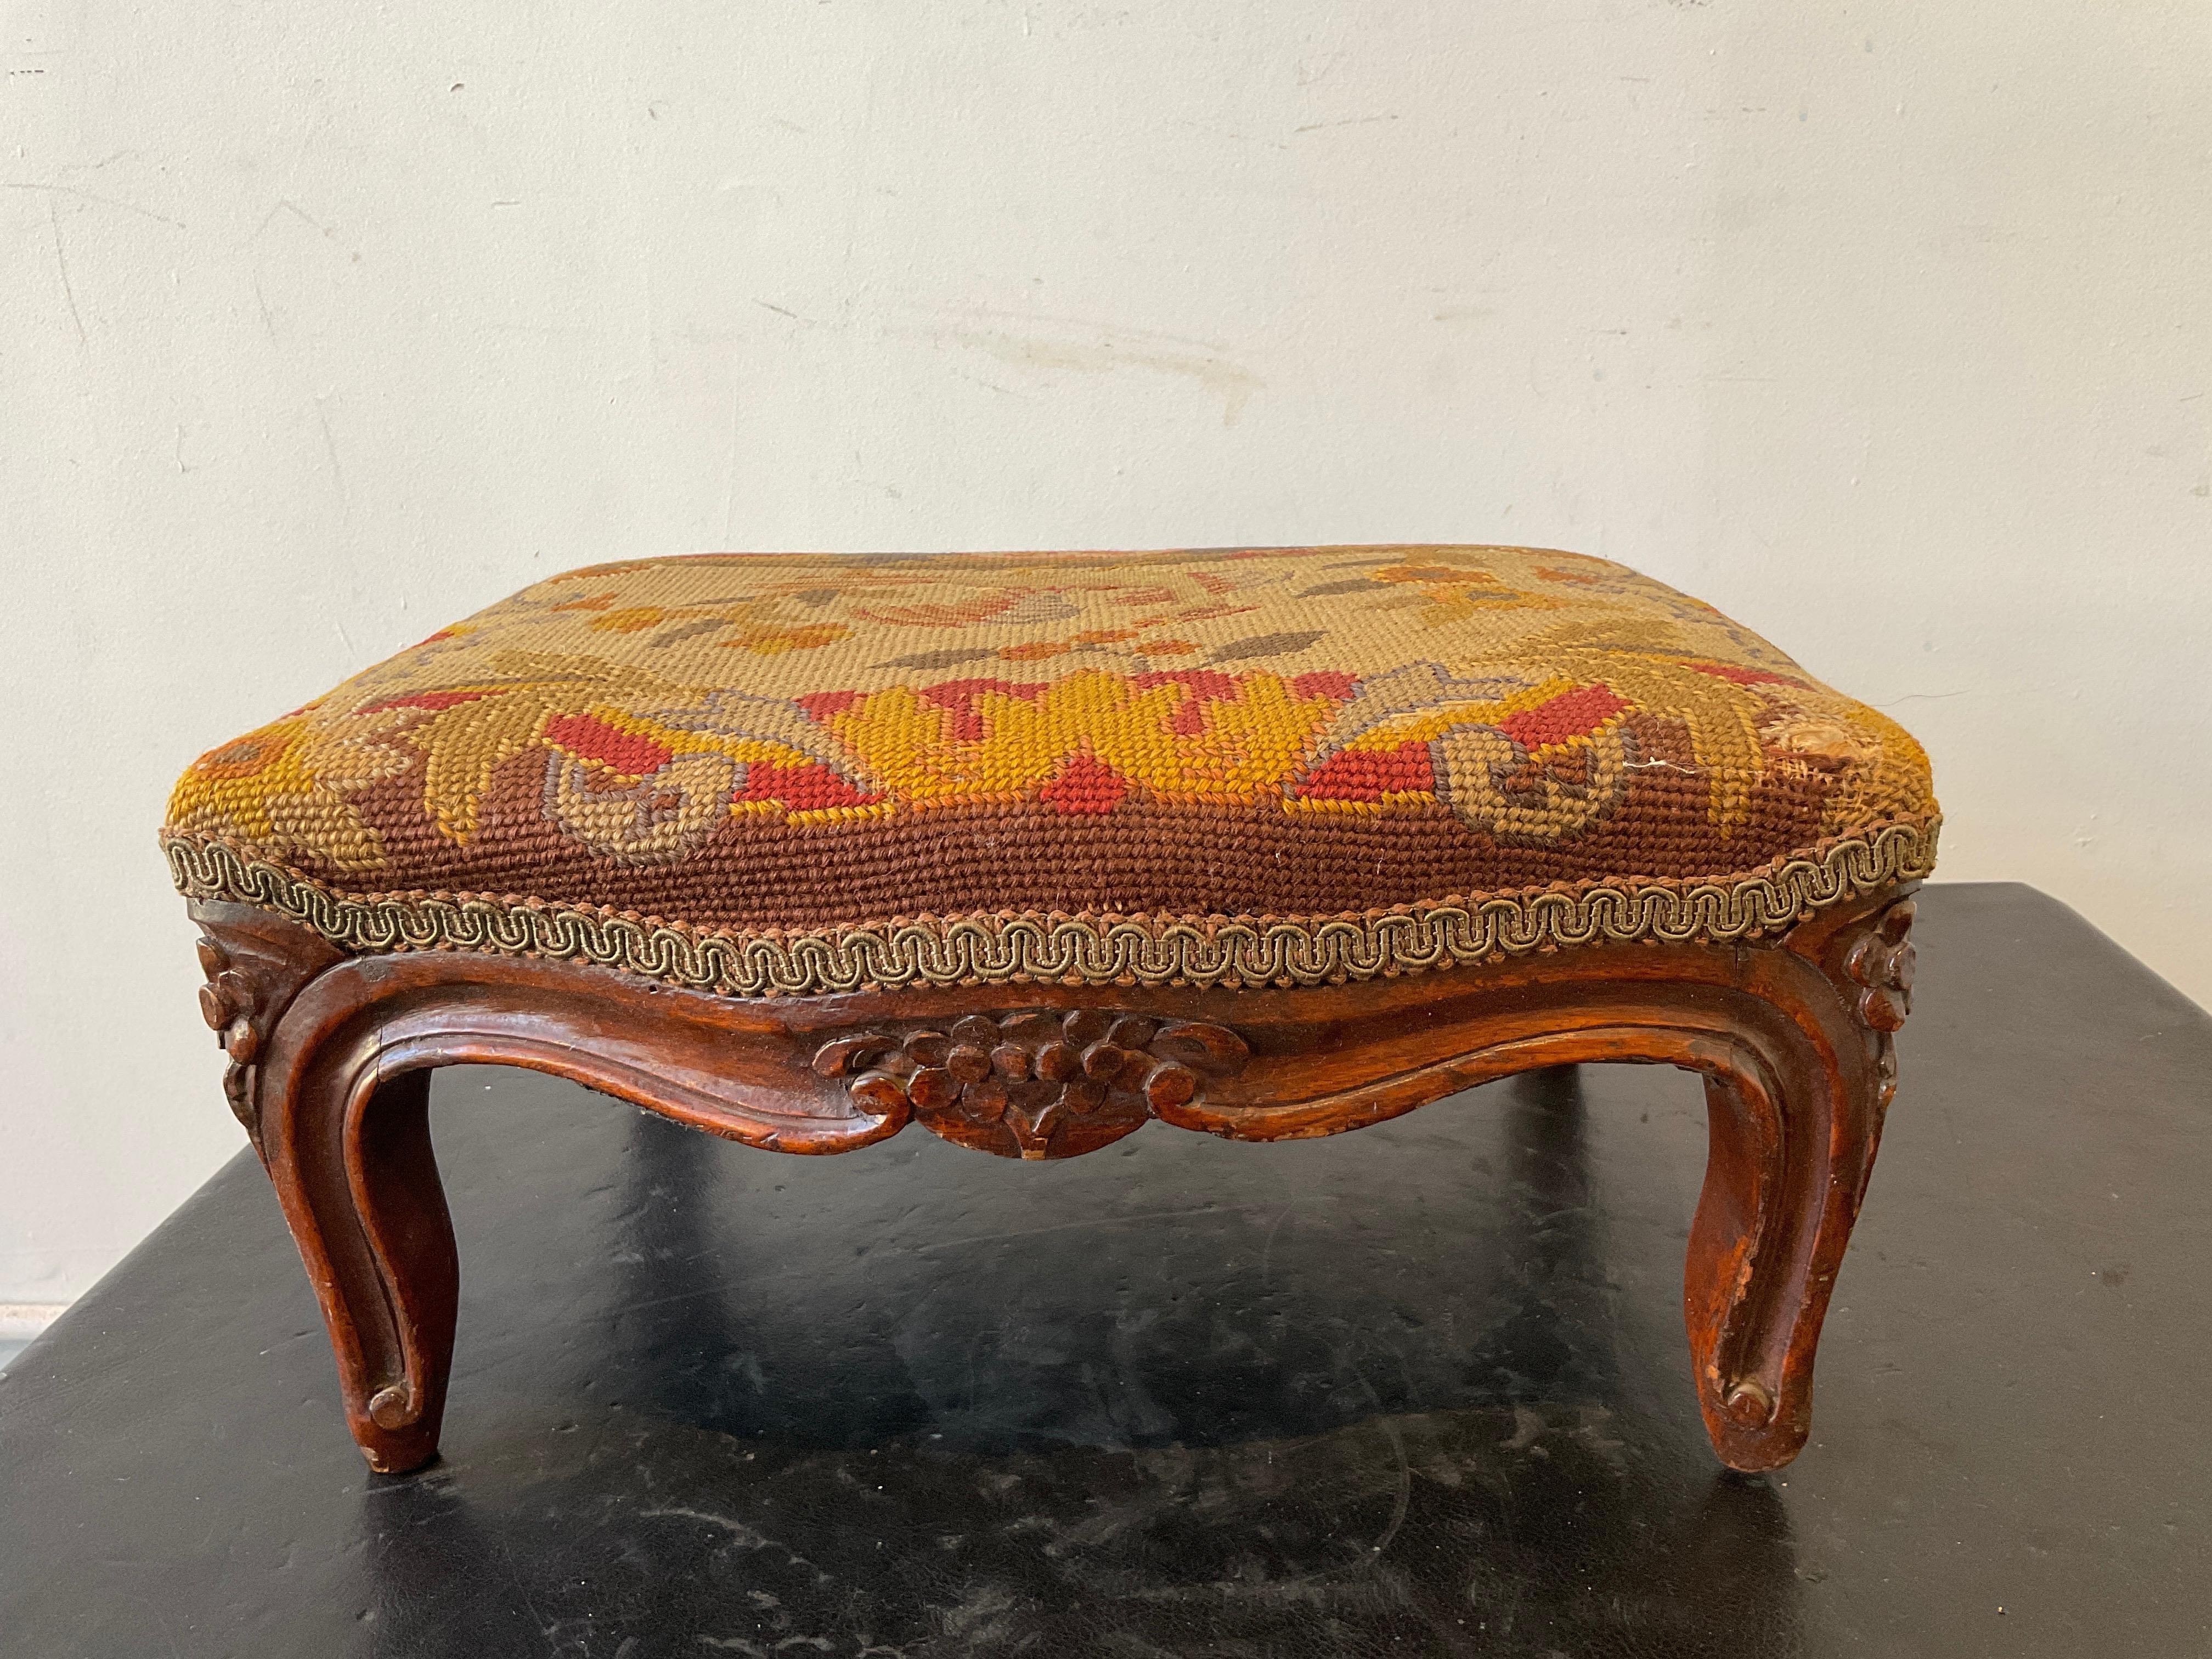 1910 French Hand Carved Wood Footstool with Needlepoint Top For Sale 3